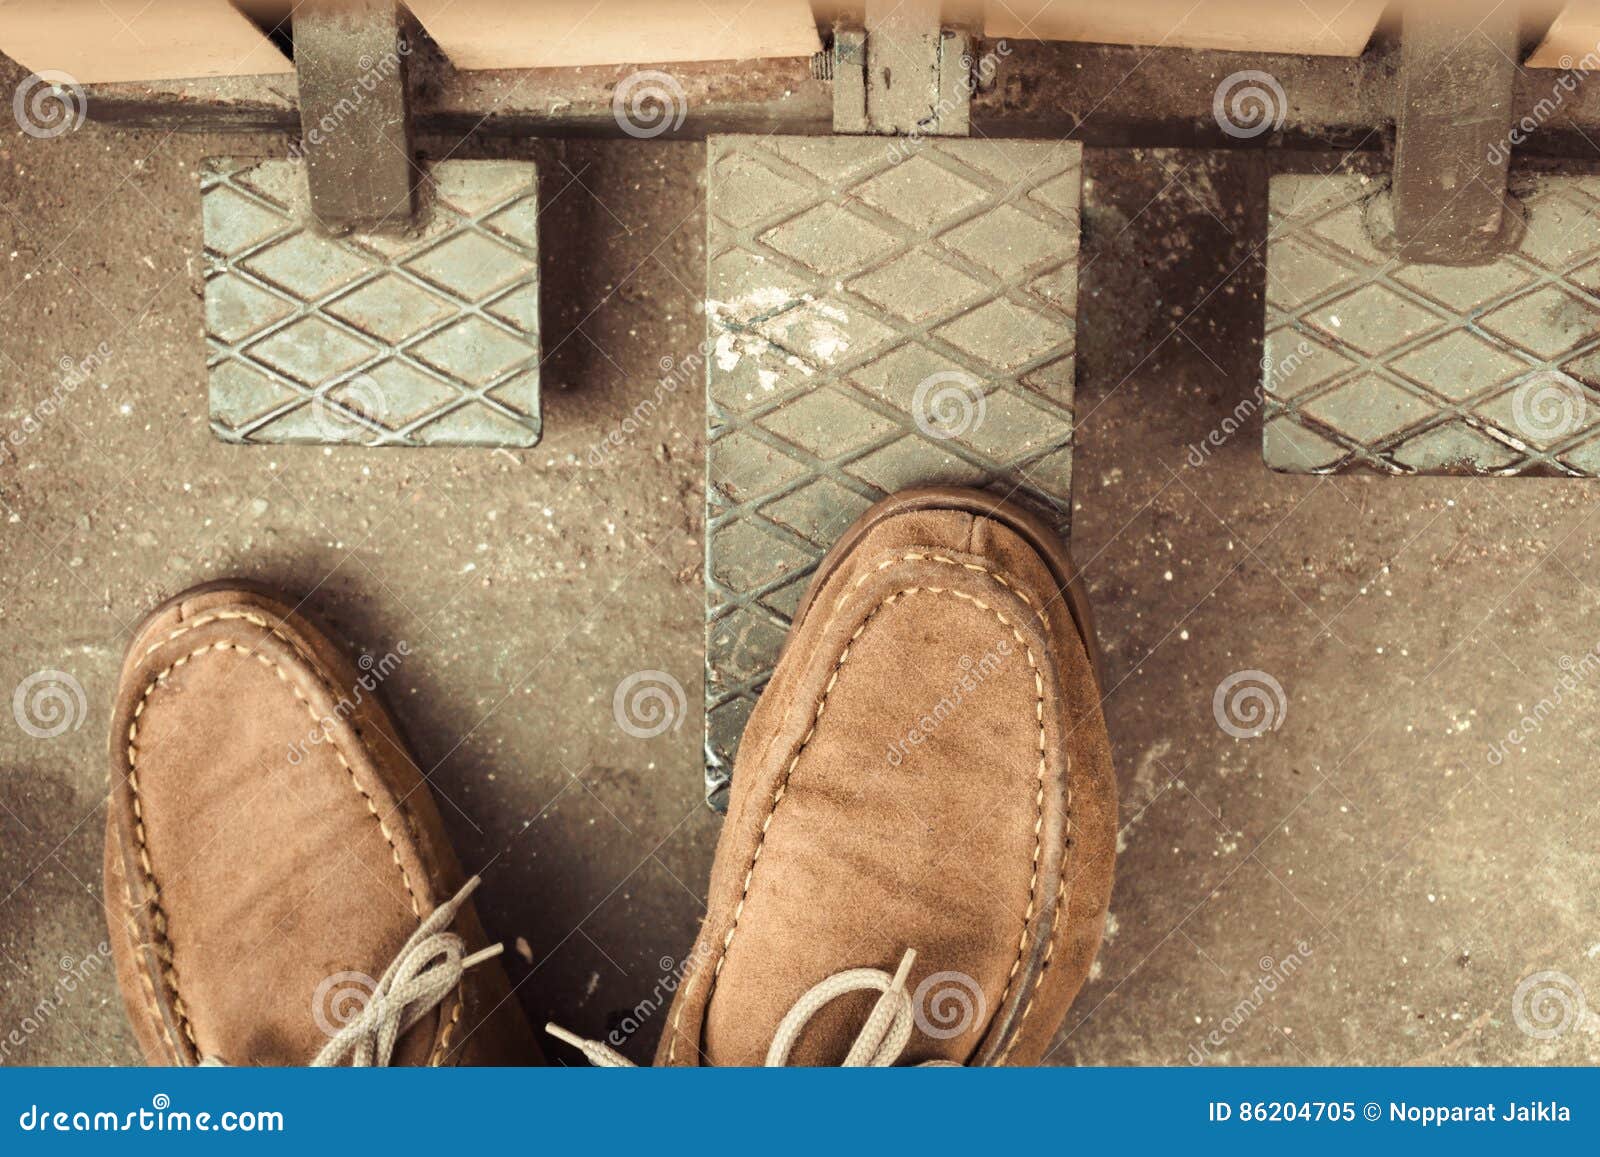 Testing Stepping on Car Gas Pedal Stock Image - Image of move, motor ...